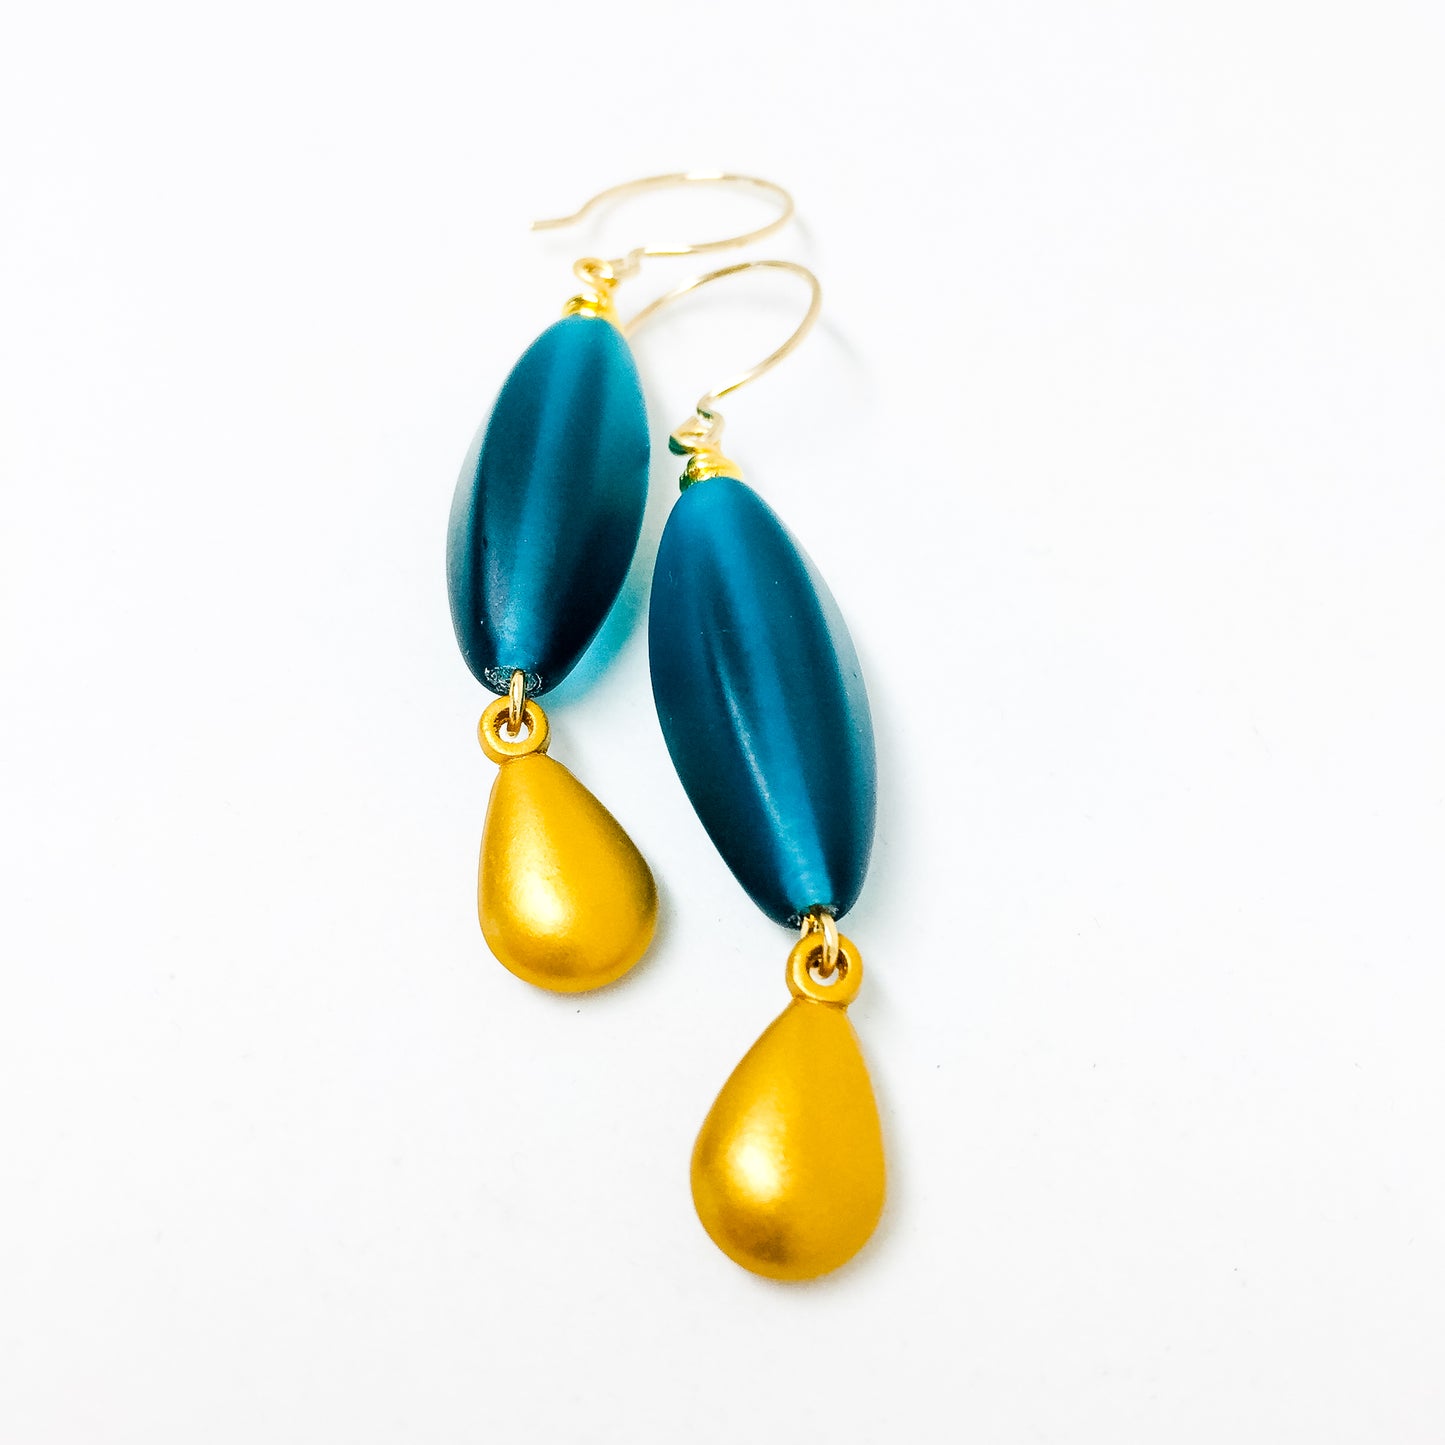 Teal frosted Czech glass bead drop earrings with gold charm